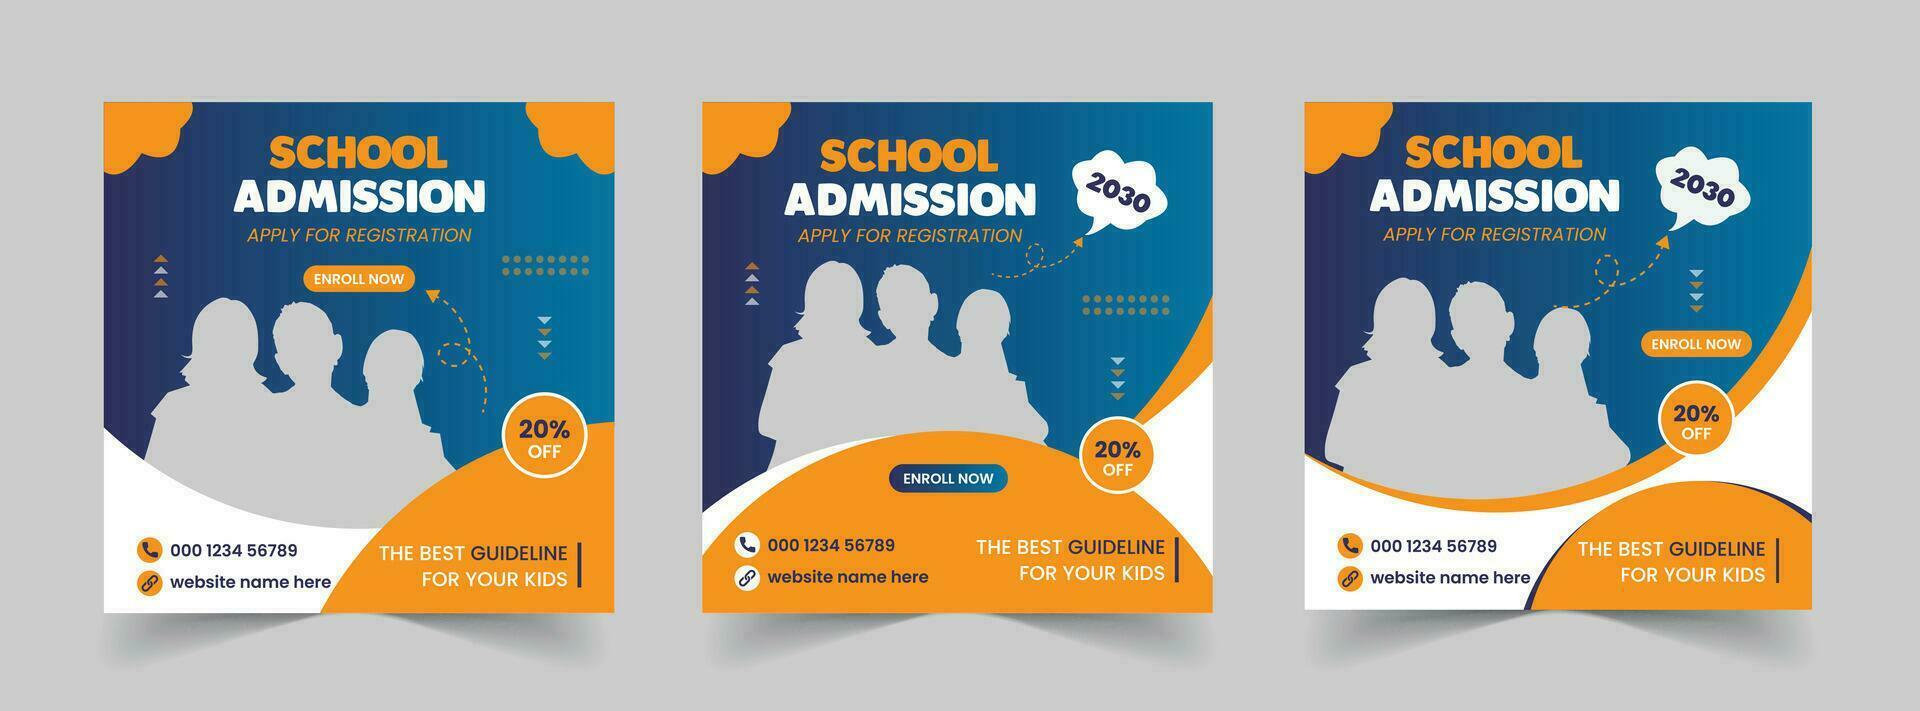 Free Vector School Admission Social Media Post and Back to School Educational Web Banner Template design